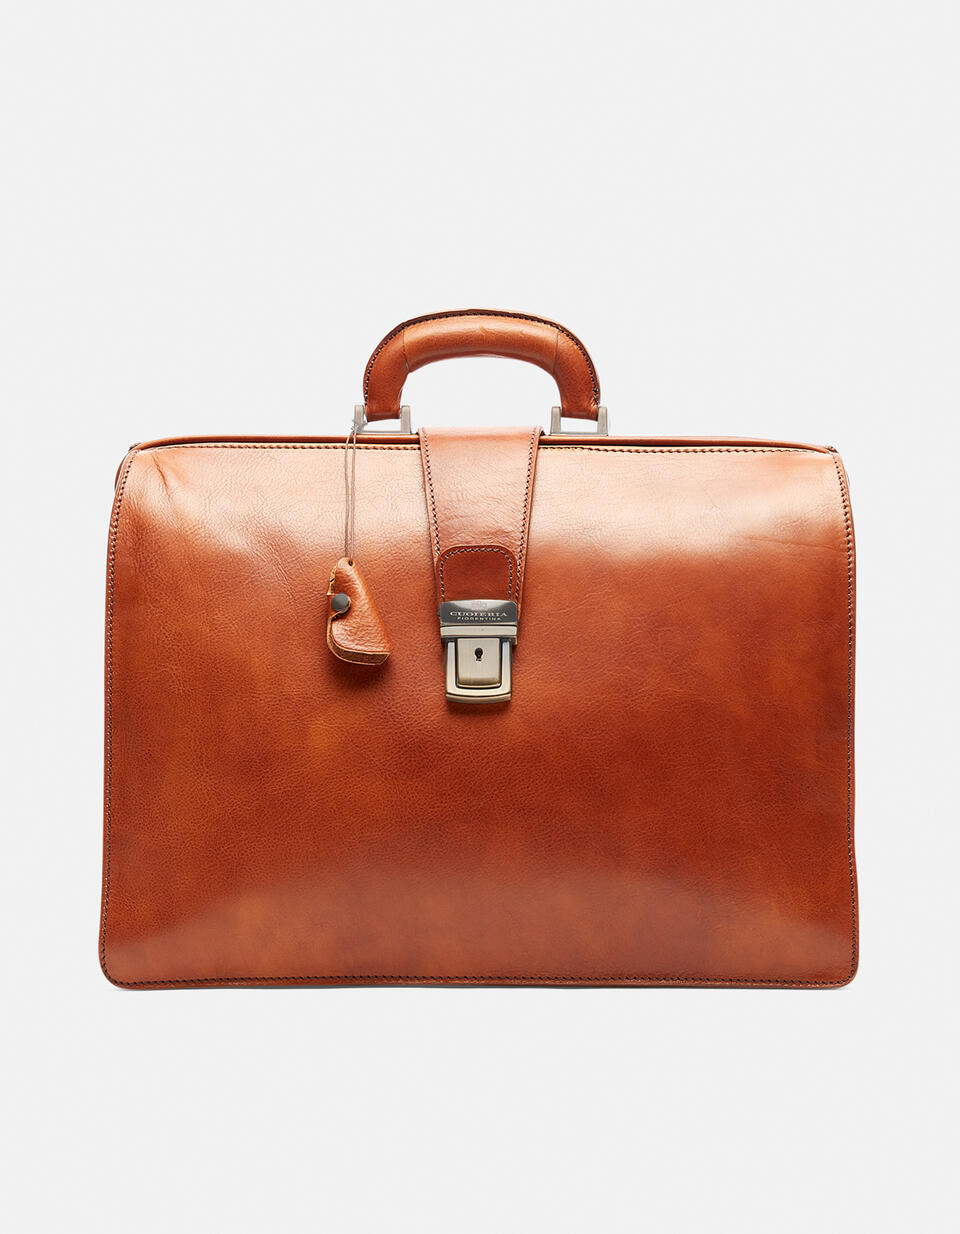 Large classic doctor's bag with unlined interior - Doctor Bags | Briefcases COGNAC - Doctor Bags | BriefcasesCuoieria Fiorentina